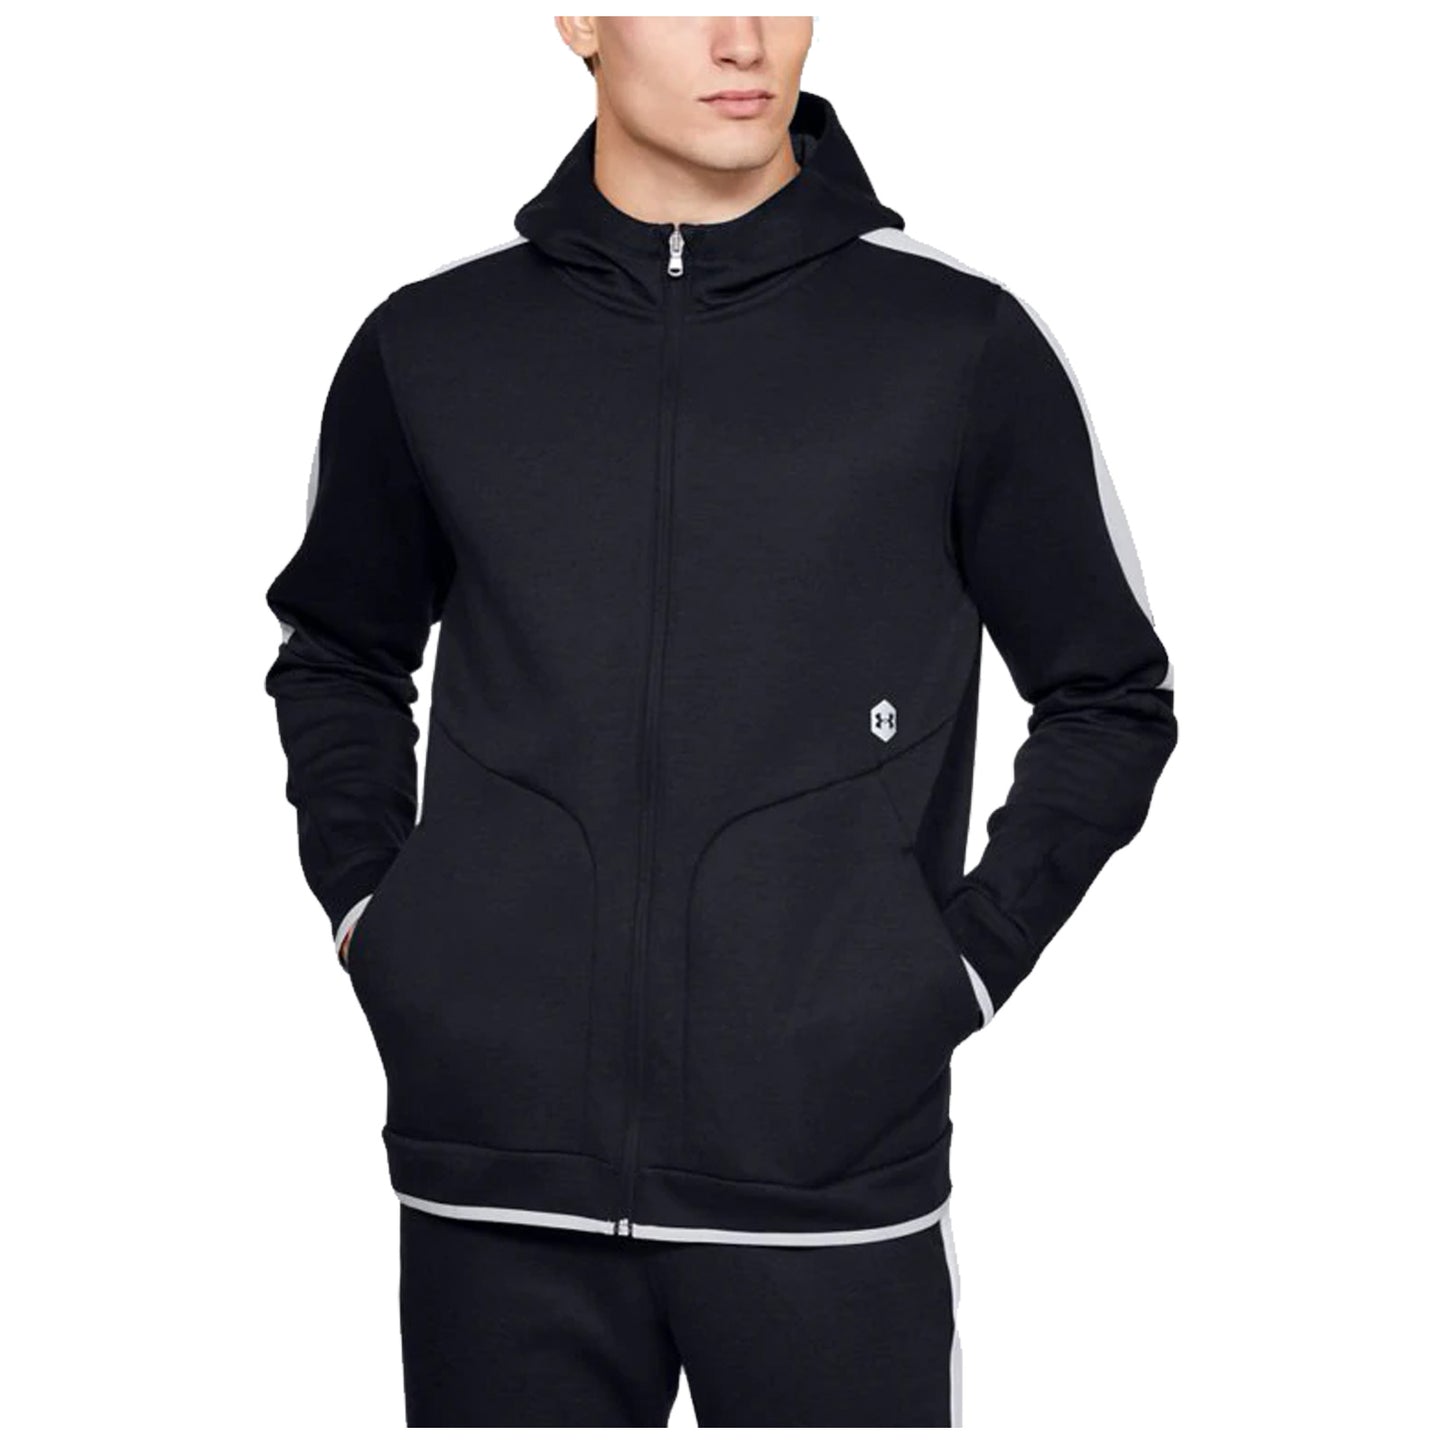 Under Armour Mens Athlete Recovery Full Zip Hoodie